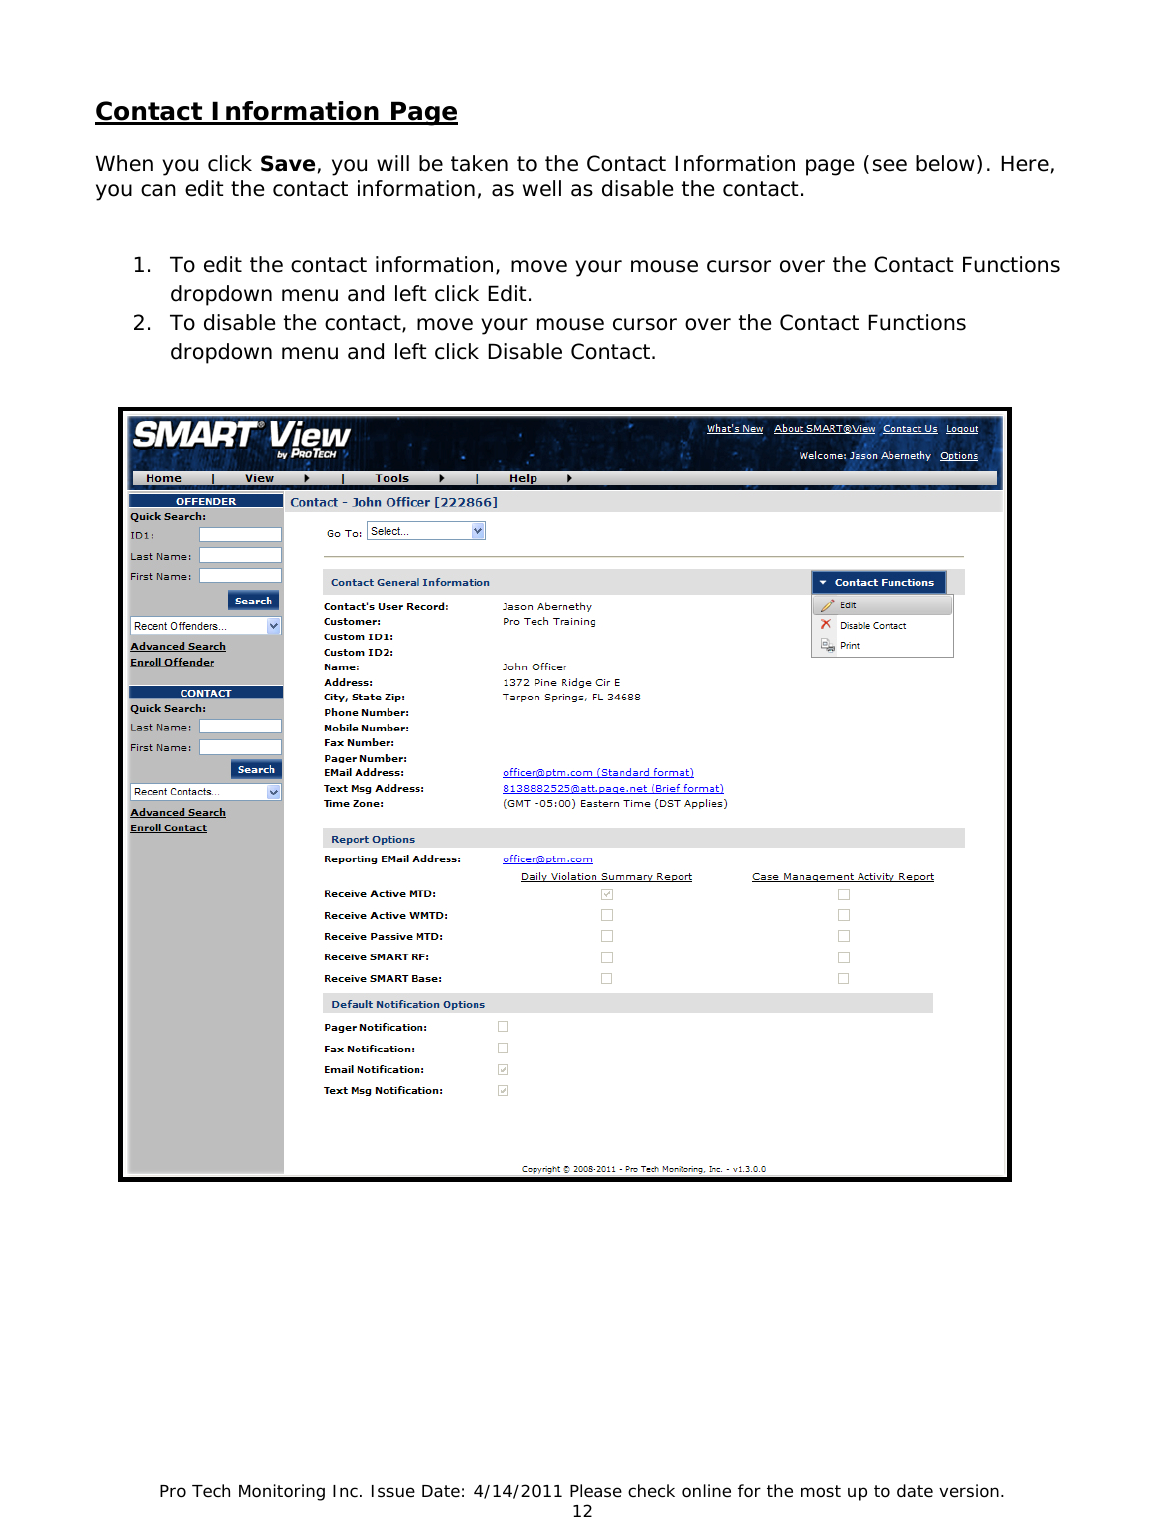 Pro Tech Monitoring Inc. Issue Date: 4/14/2011 Please check online for the most up to date version. 12  Contact Information Page  When you click Save, you will be taken to the Contact Information page (see below). Here, you can edit the contact information, as well as disable the contact.  1. To edit the contact information, move your mouse cursor over the Contact Functions dropdown menu and left click Edit. 2. To disable the contact, move your mouse cursor over the Contact Functions dropdown menu and left click Disable Contact.        